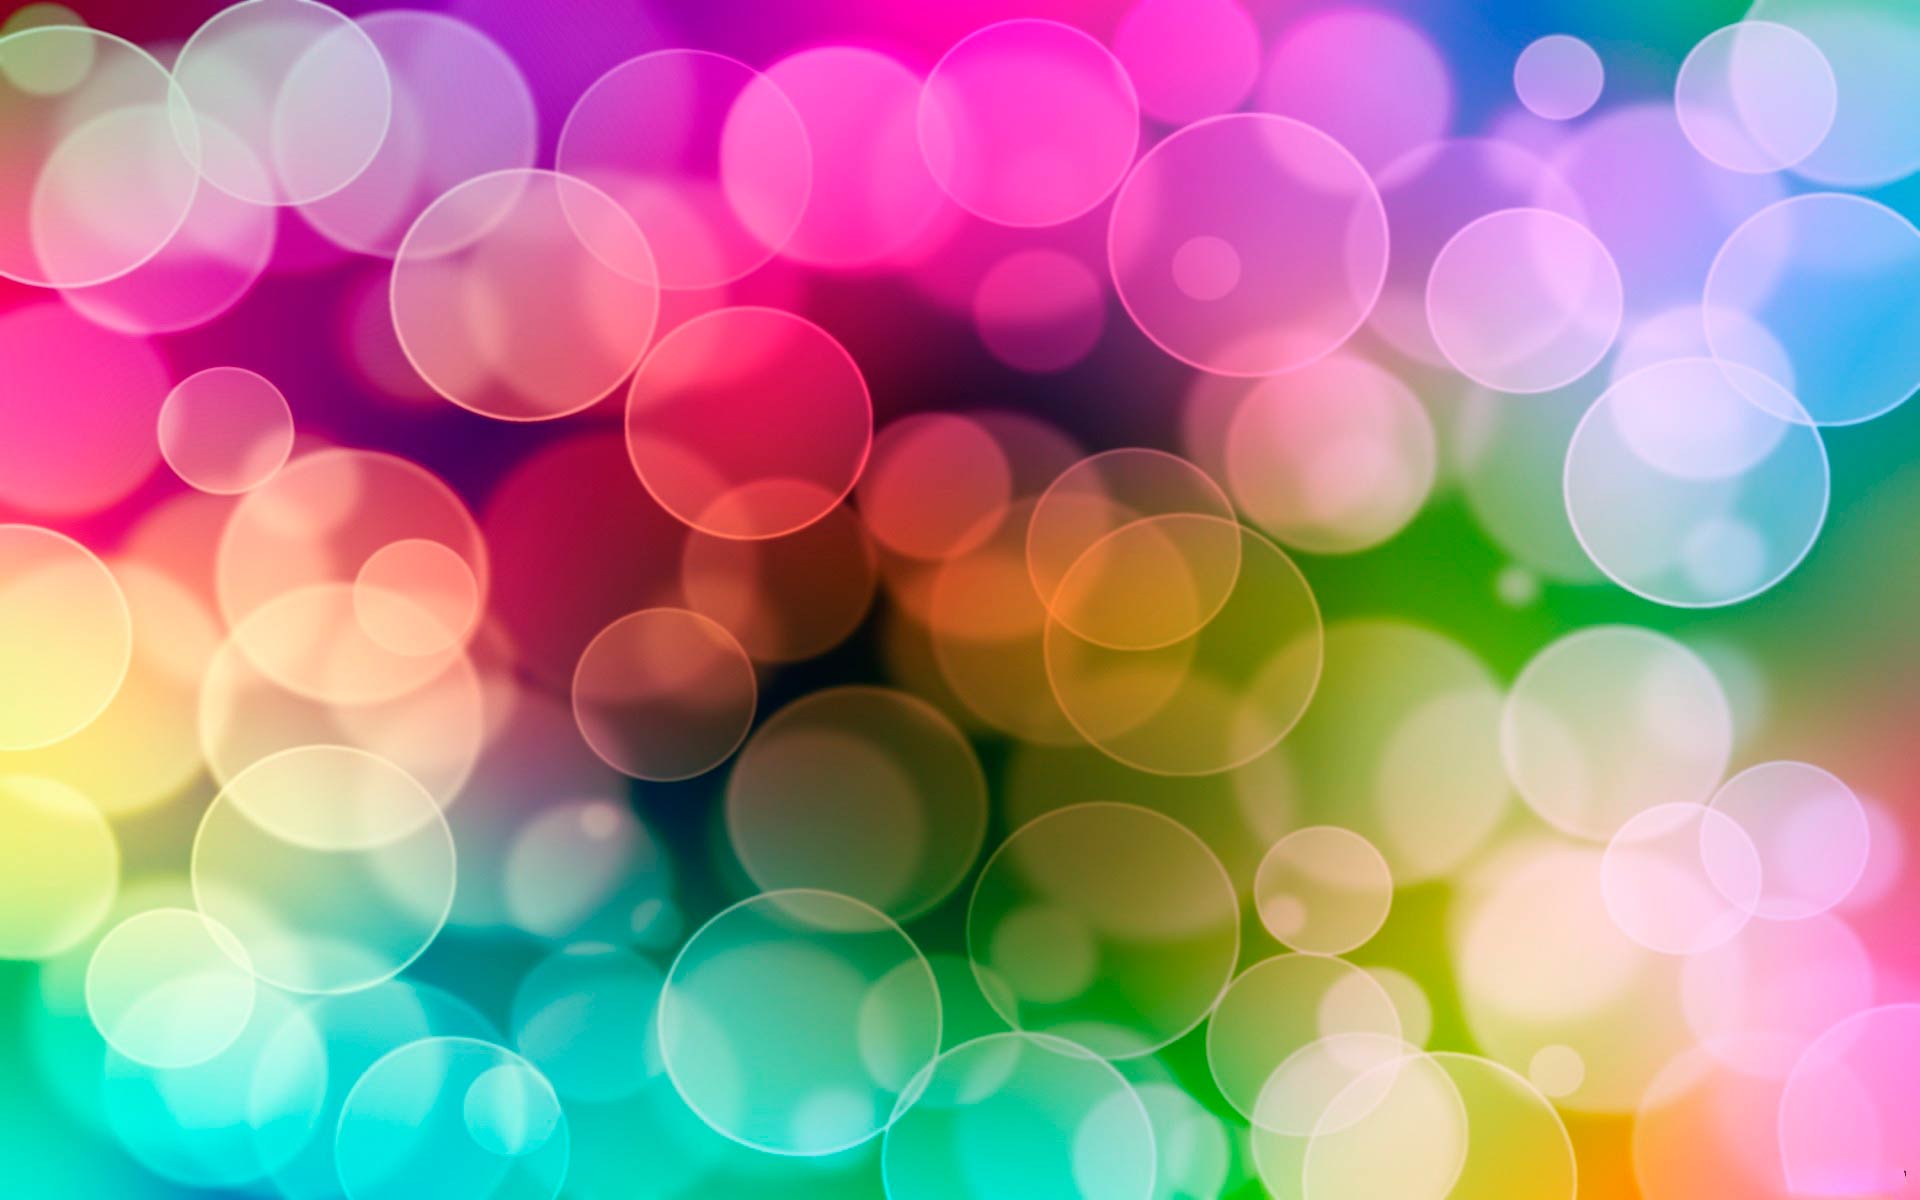 Colorful Abstract Wallpaper Background 2836 Full HD Wallpaper